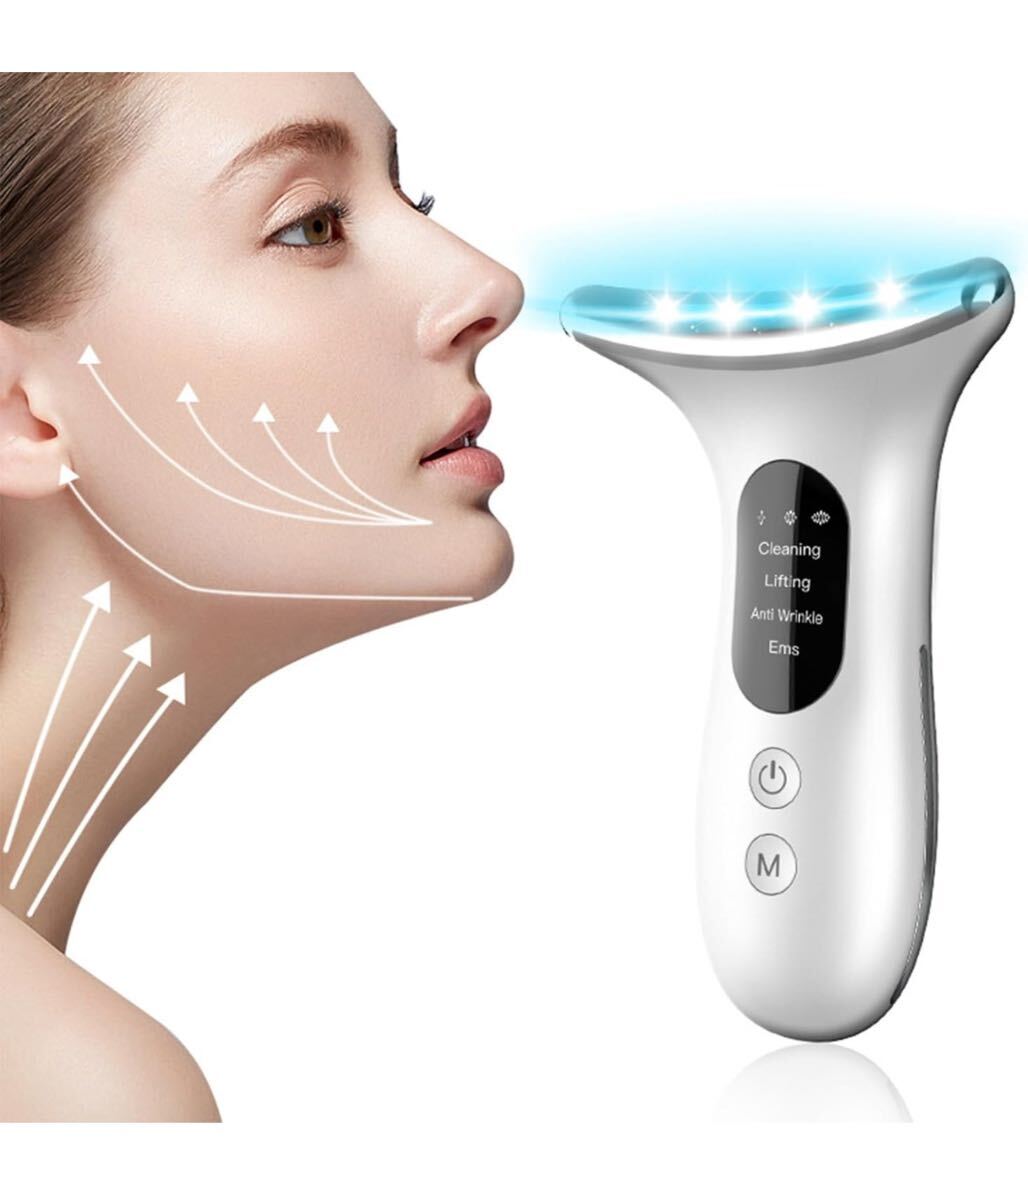  beautiful face vessel 4. mode 1 pcs both for face care body care beautiful face roller man and woman use EMS multifunction beautiful face vessel home use beautiful face vessel USB rechargeable super light weight carrying convenience 